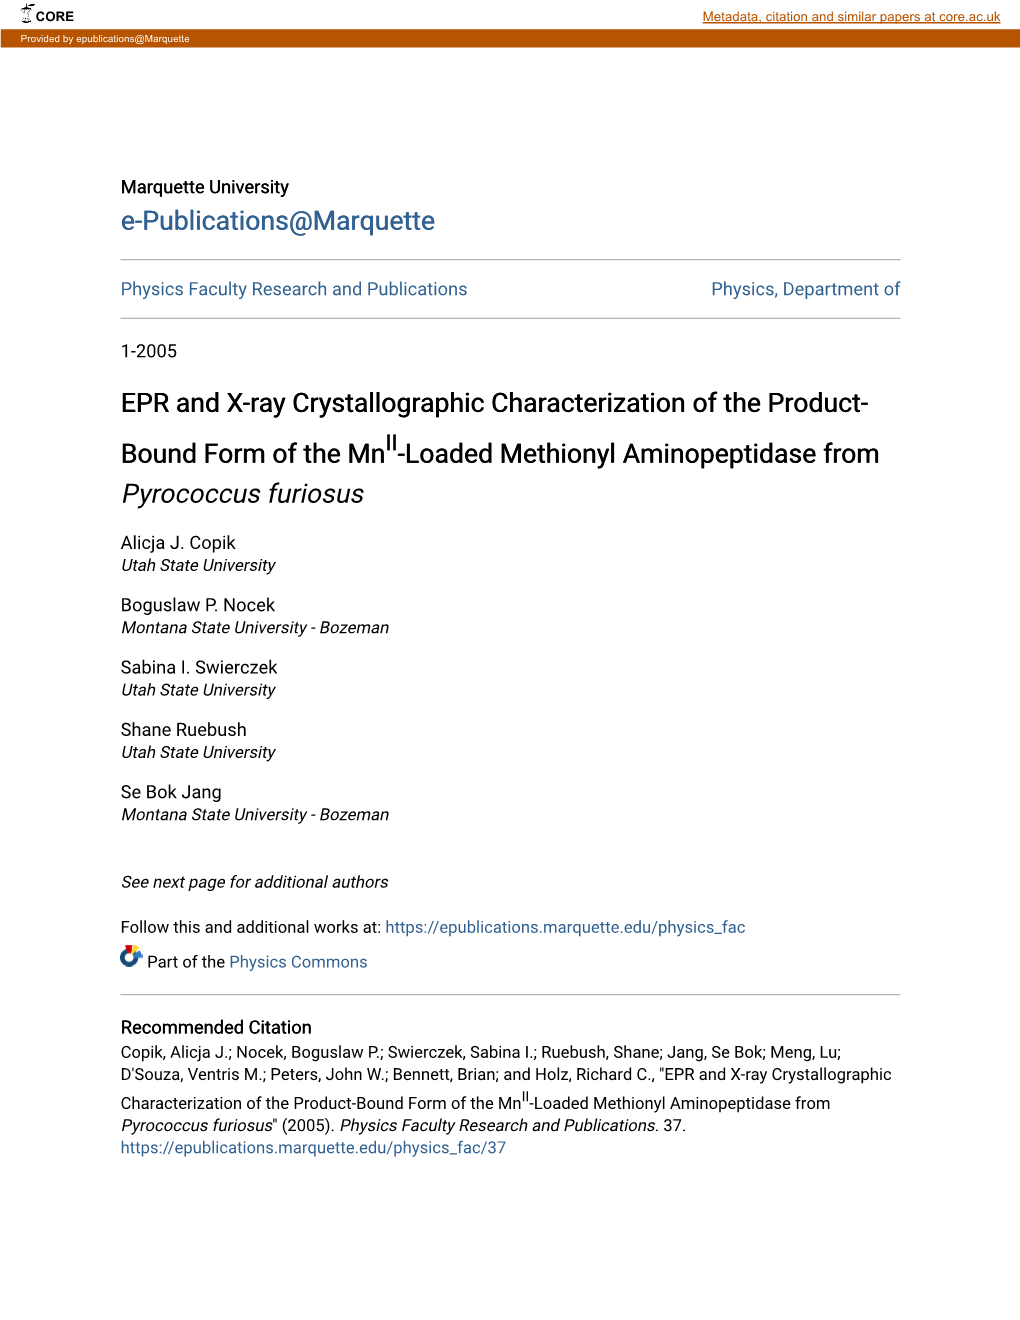 EPR and X-Ray Crystallographic Characterization of the Product- Bound Form of the Mnii-Loaded Methionyl Aminopeptidase from Pyrococcus Furiosus